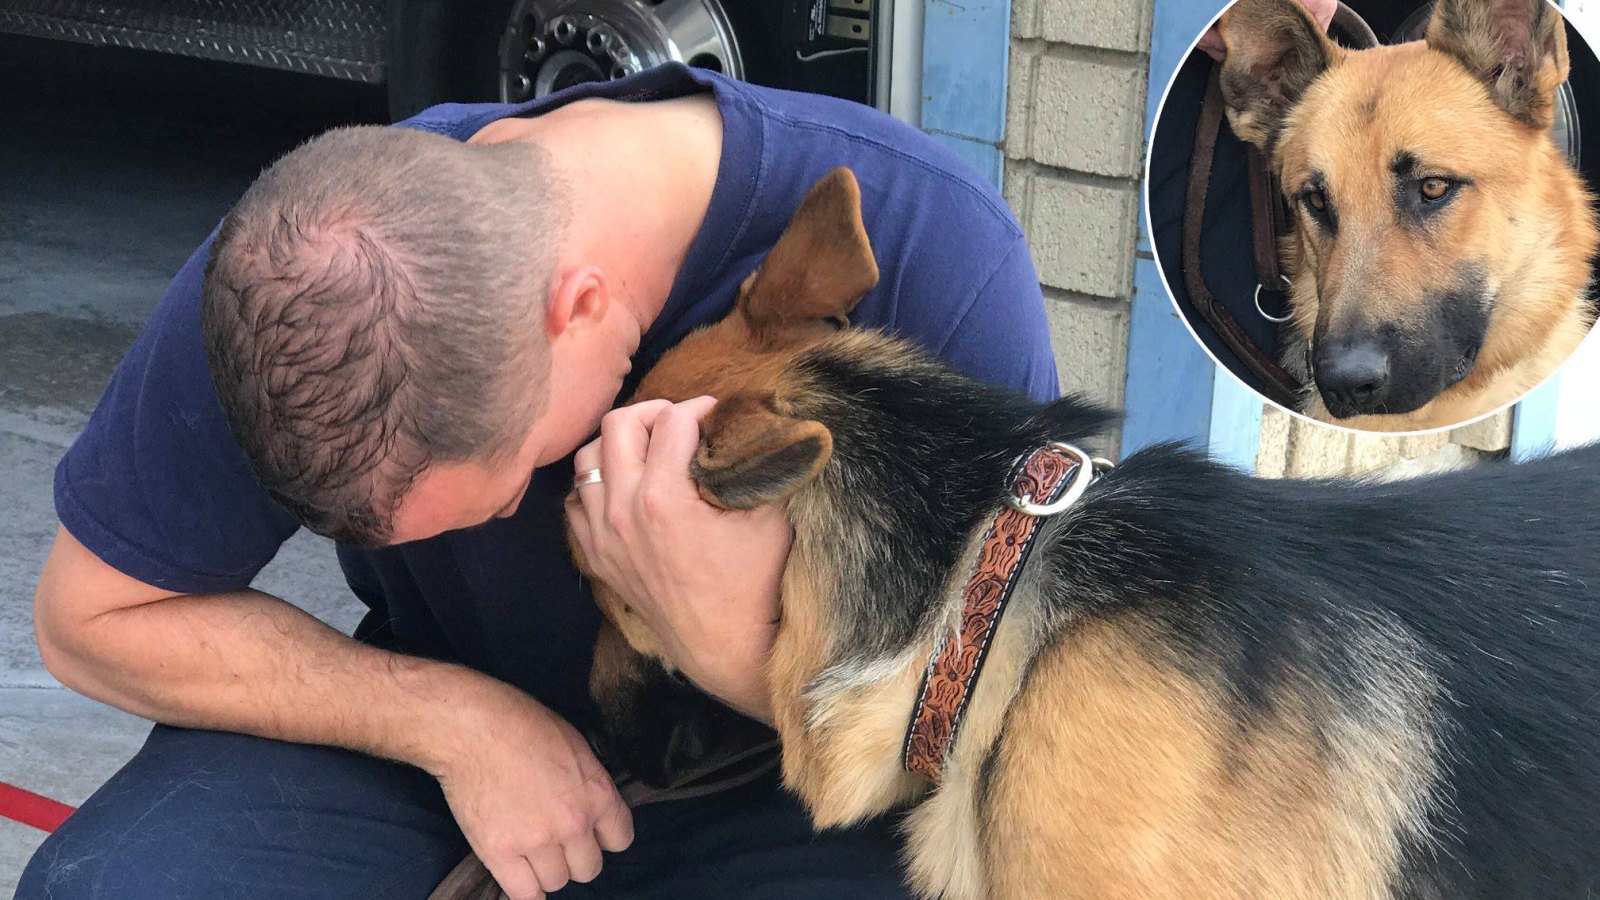 Utah Fireman Reunites With Dog He Helped Save During California Fire